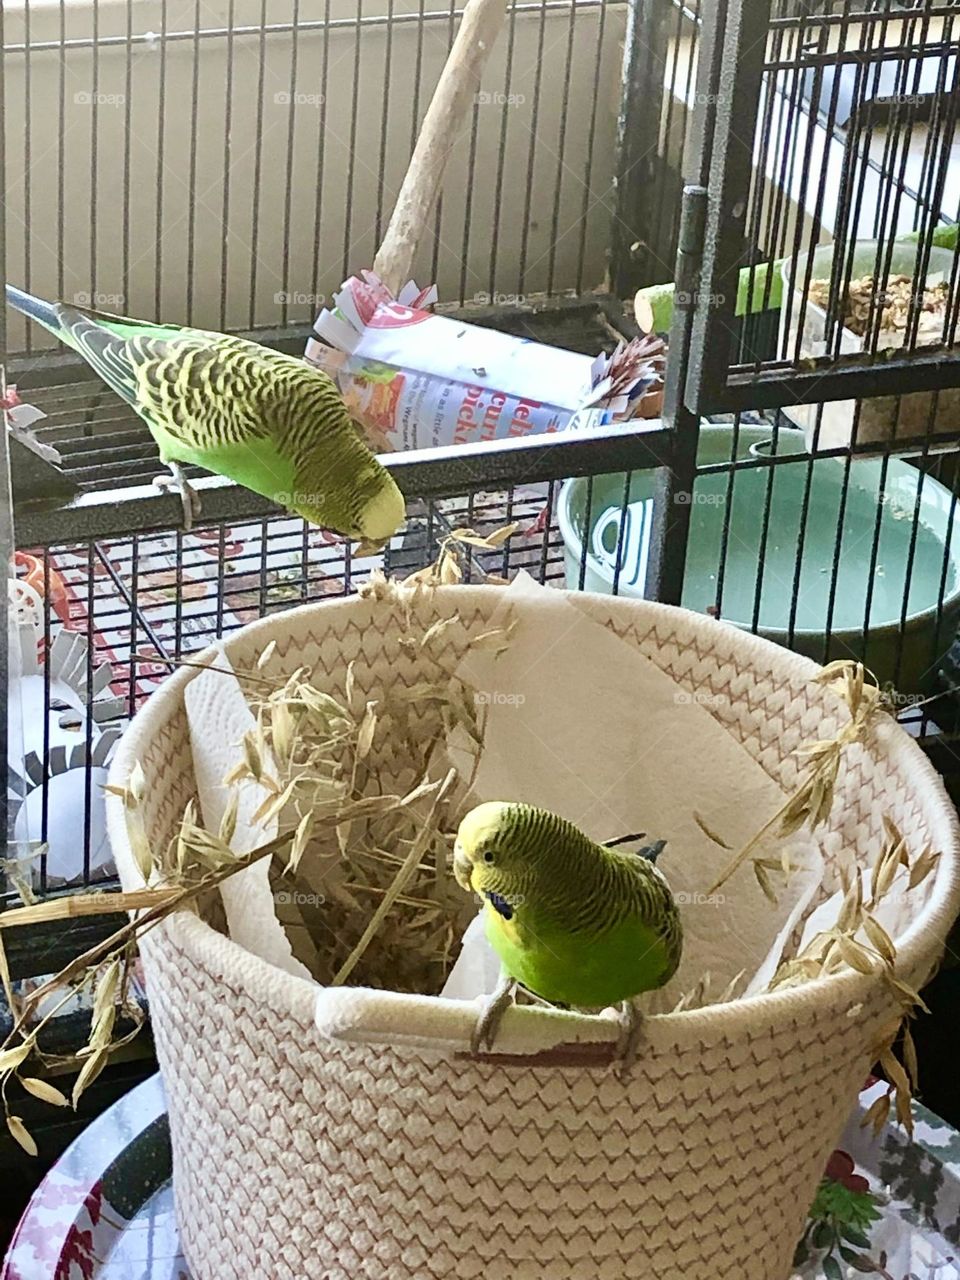 Checking out the basket of oats spree - Kiwi and Coco 🌿